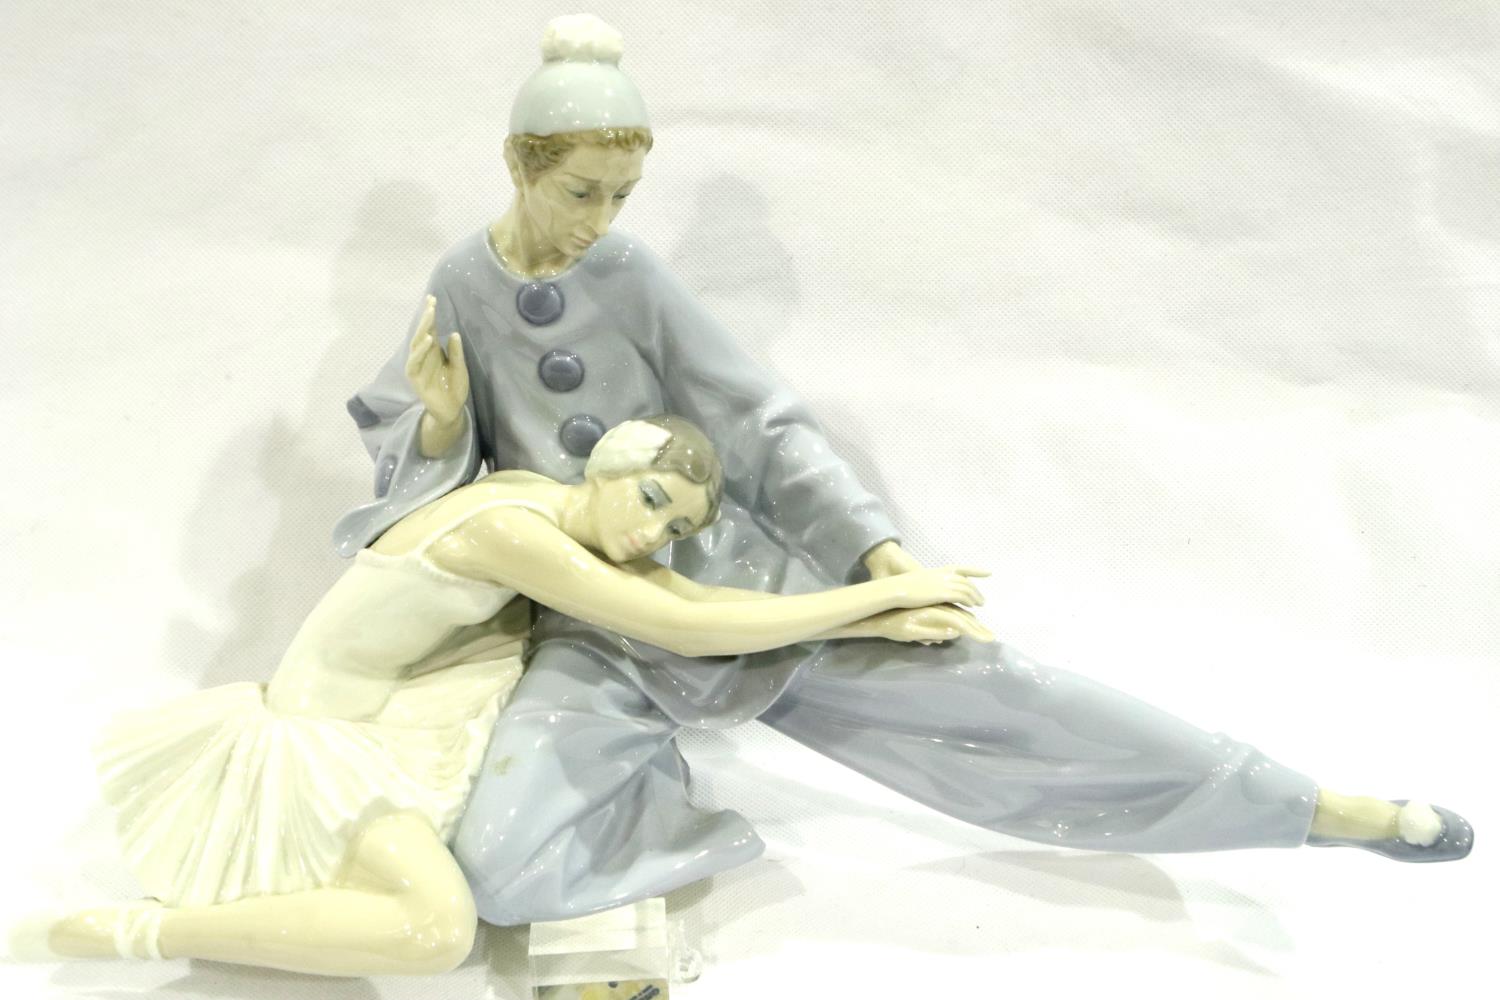 Lladro figurine of ballet dancers, H: 24 cm, losses to one foot. P&P Group 2 (£18+VAT for the